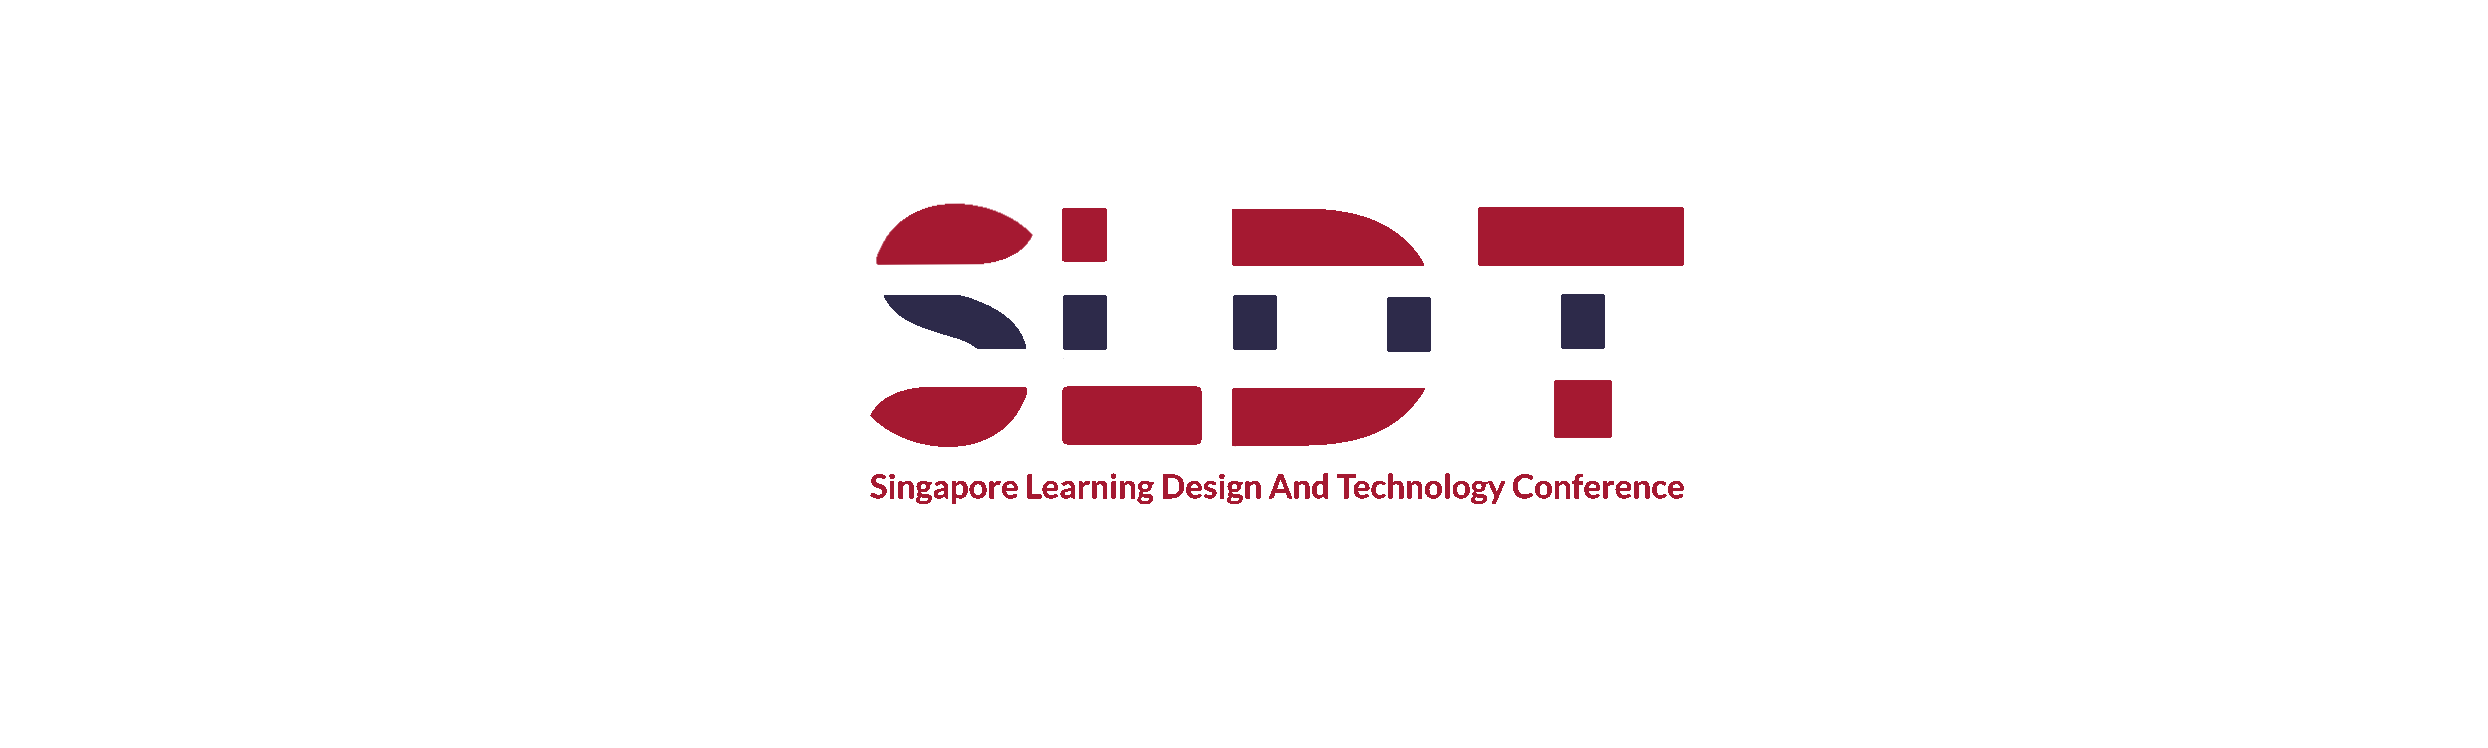 Singapore Learning Design and Technology Conference 2019